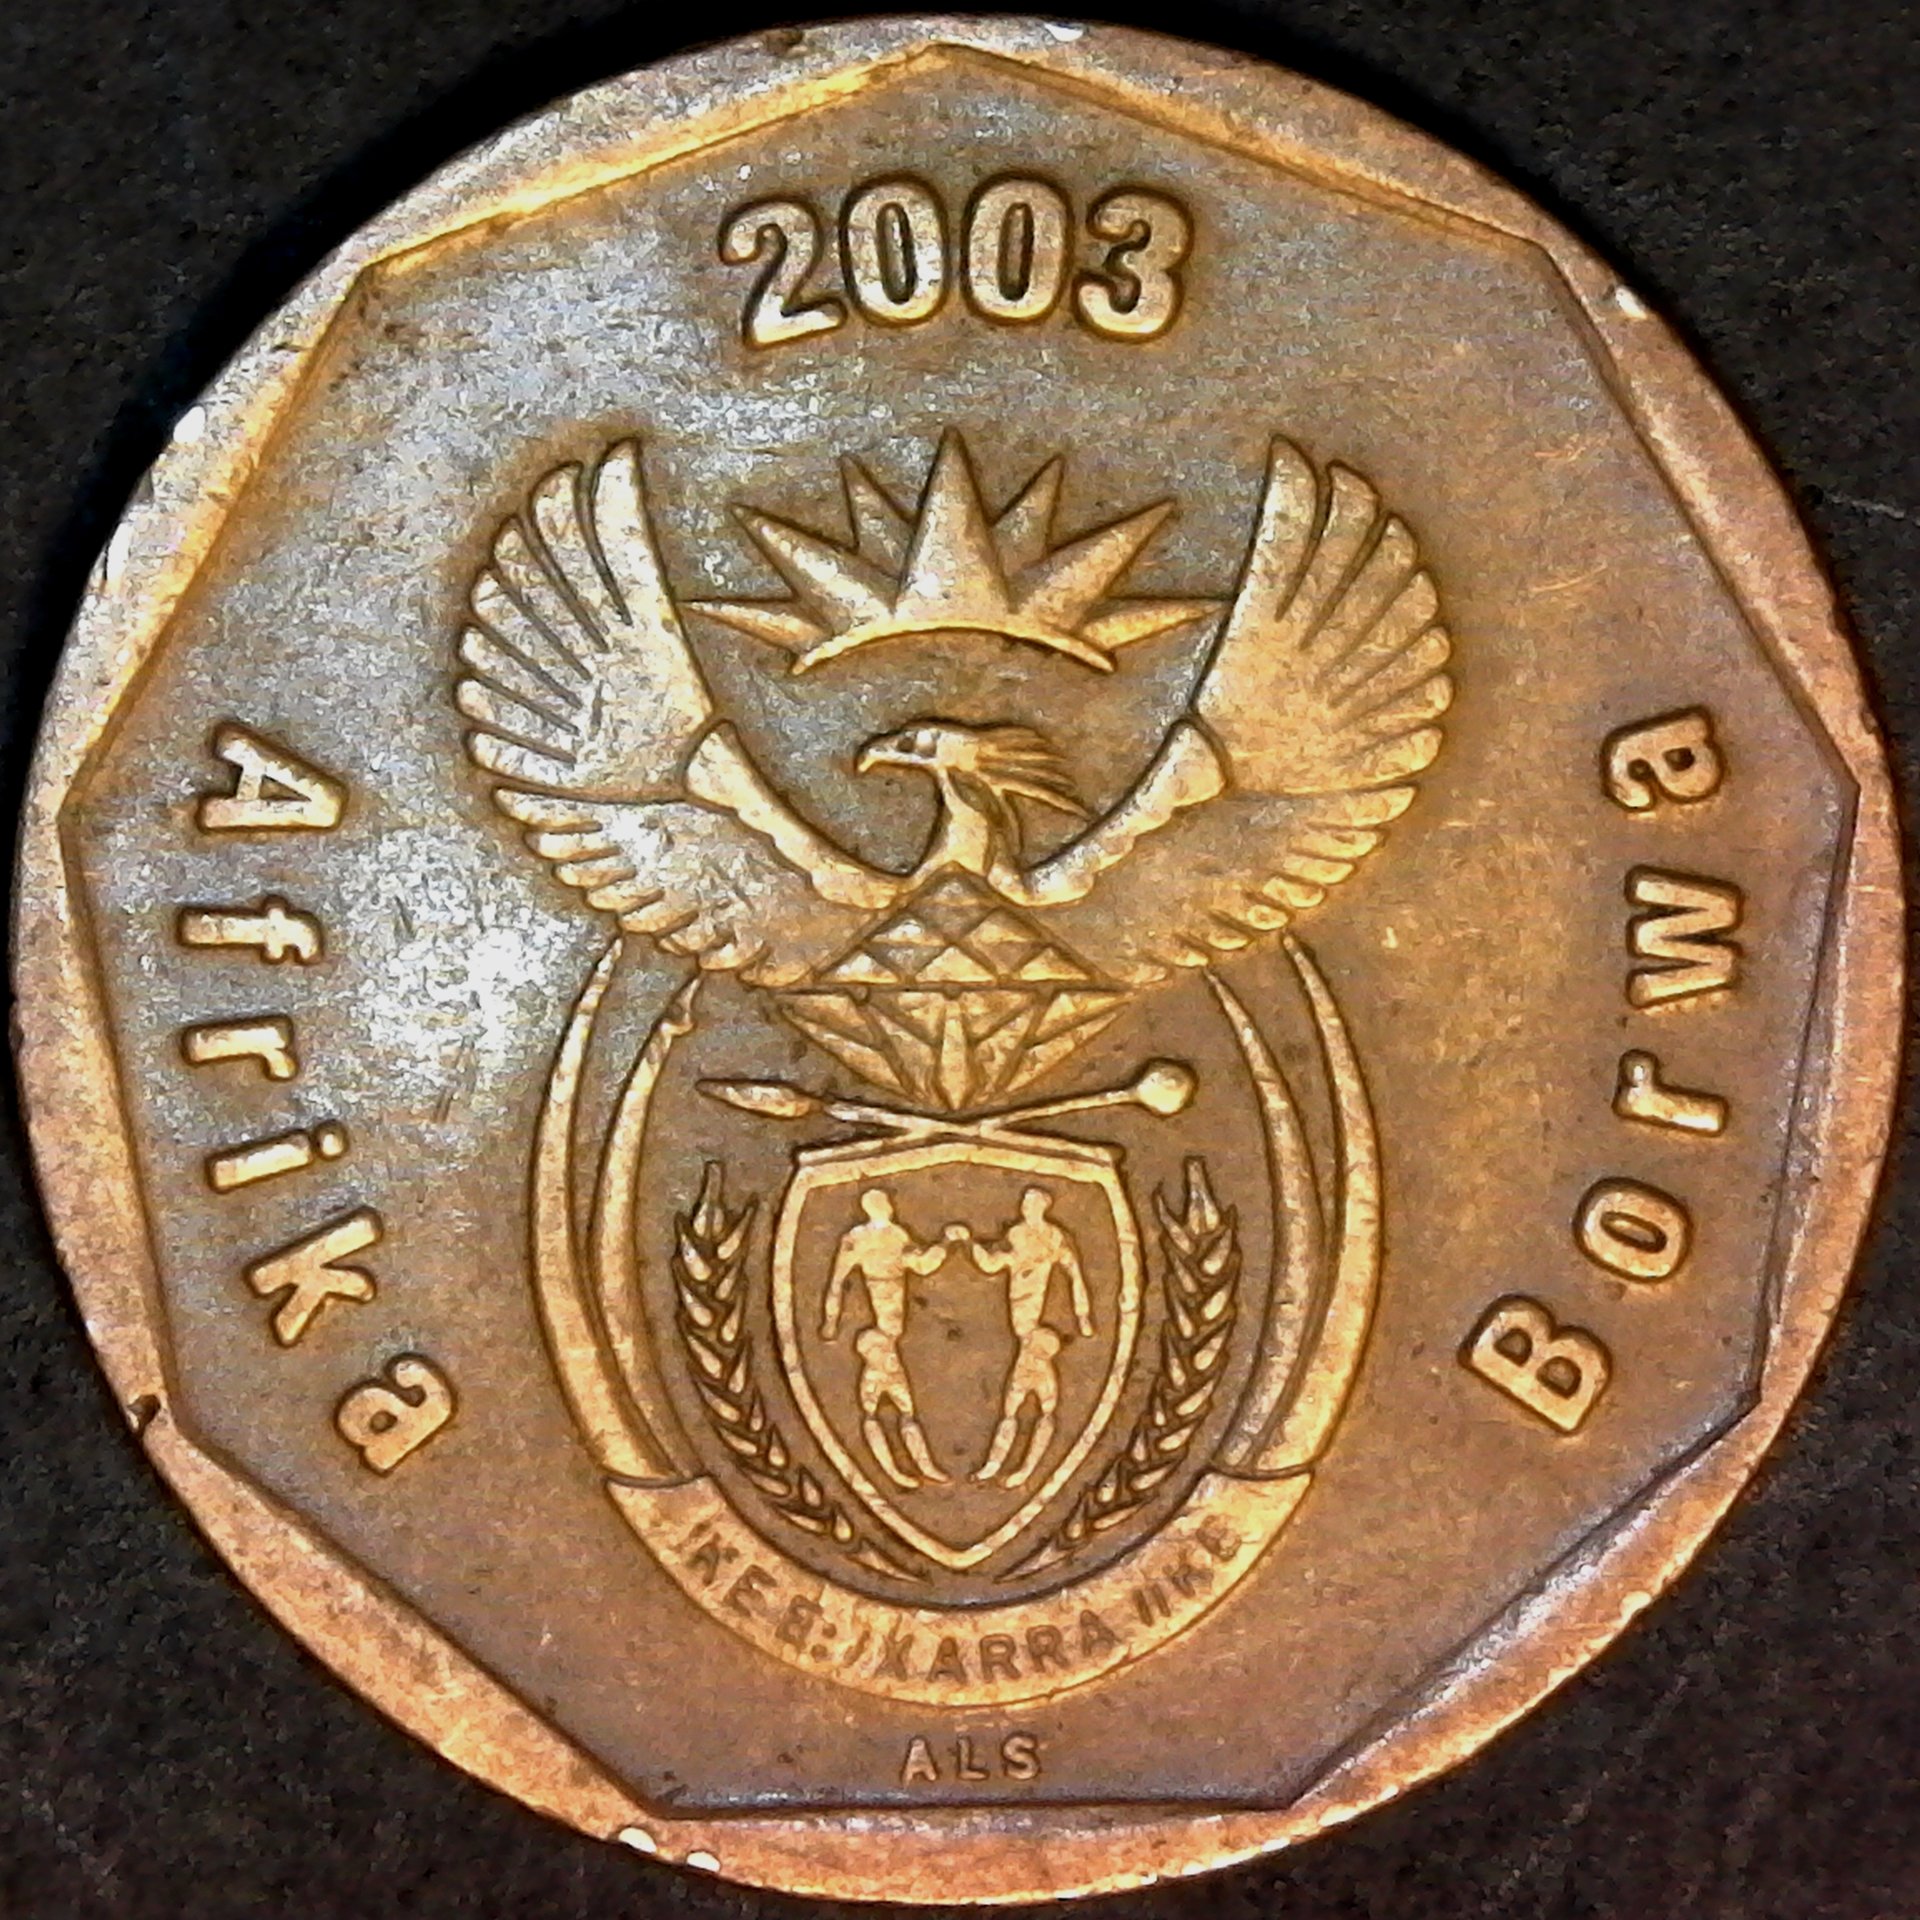 South Africa 50 Cents 2003 obv.jpg